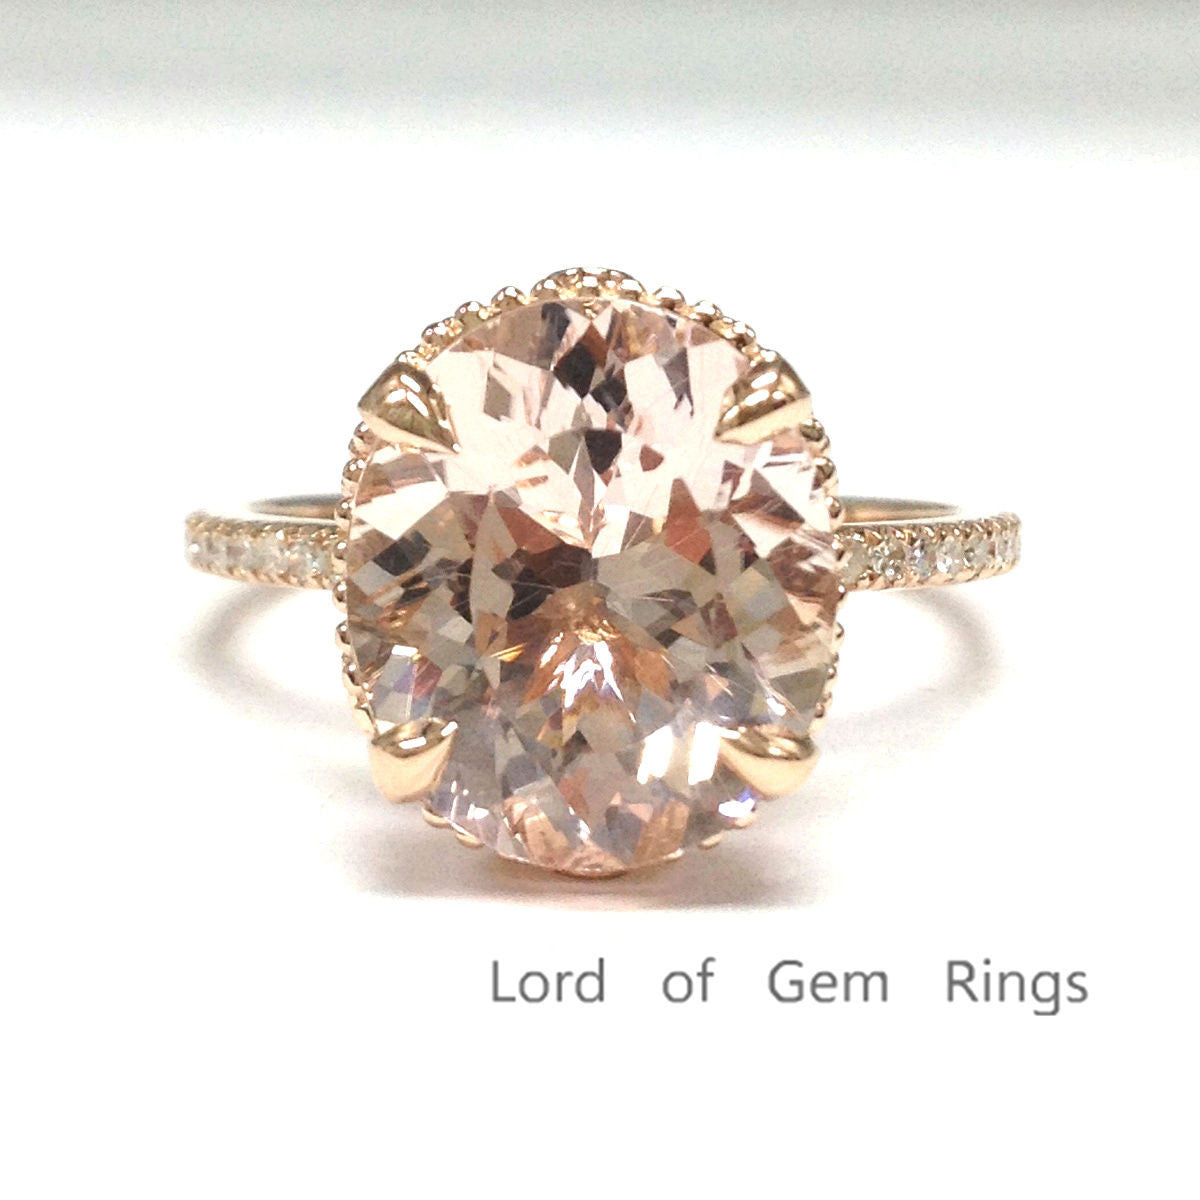 Oval Morganite Engagement Ring Pave Diamond Wedding 14K Rose Gold 10x12mm - Lord of Gem Rings - 1